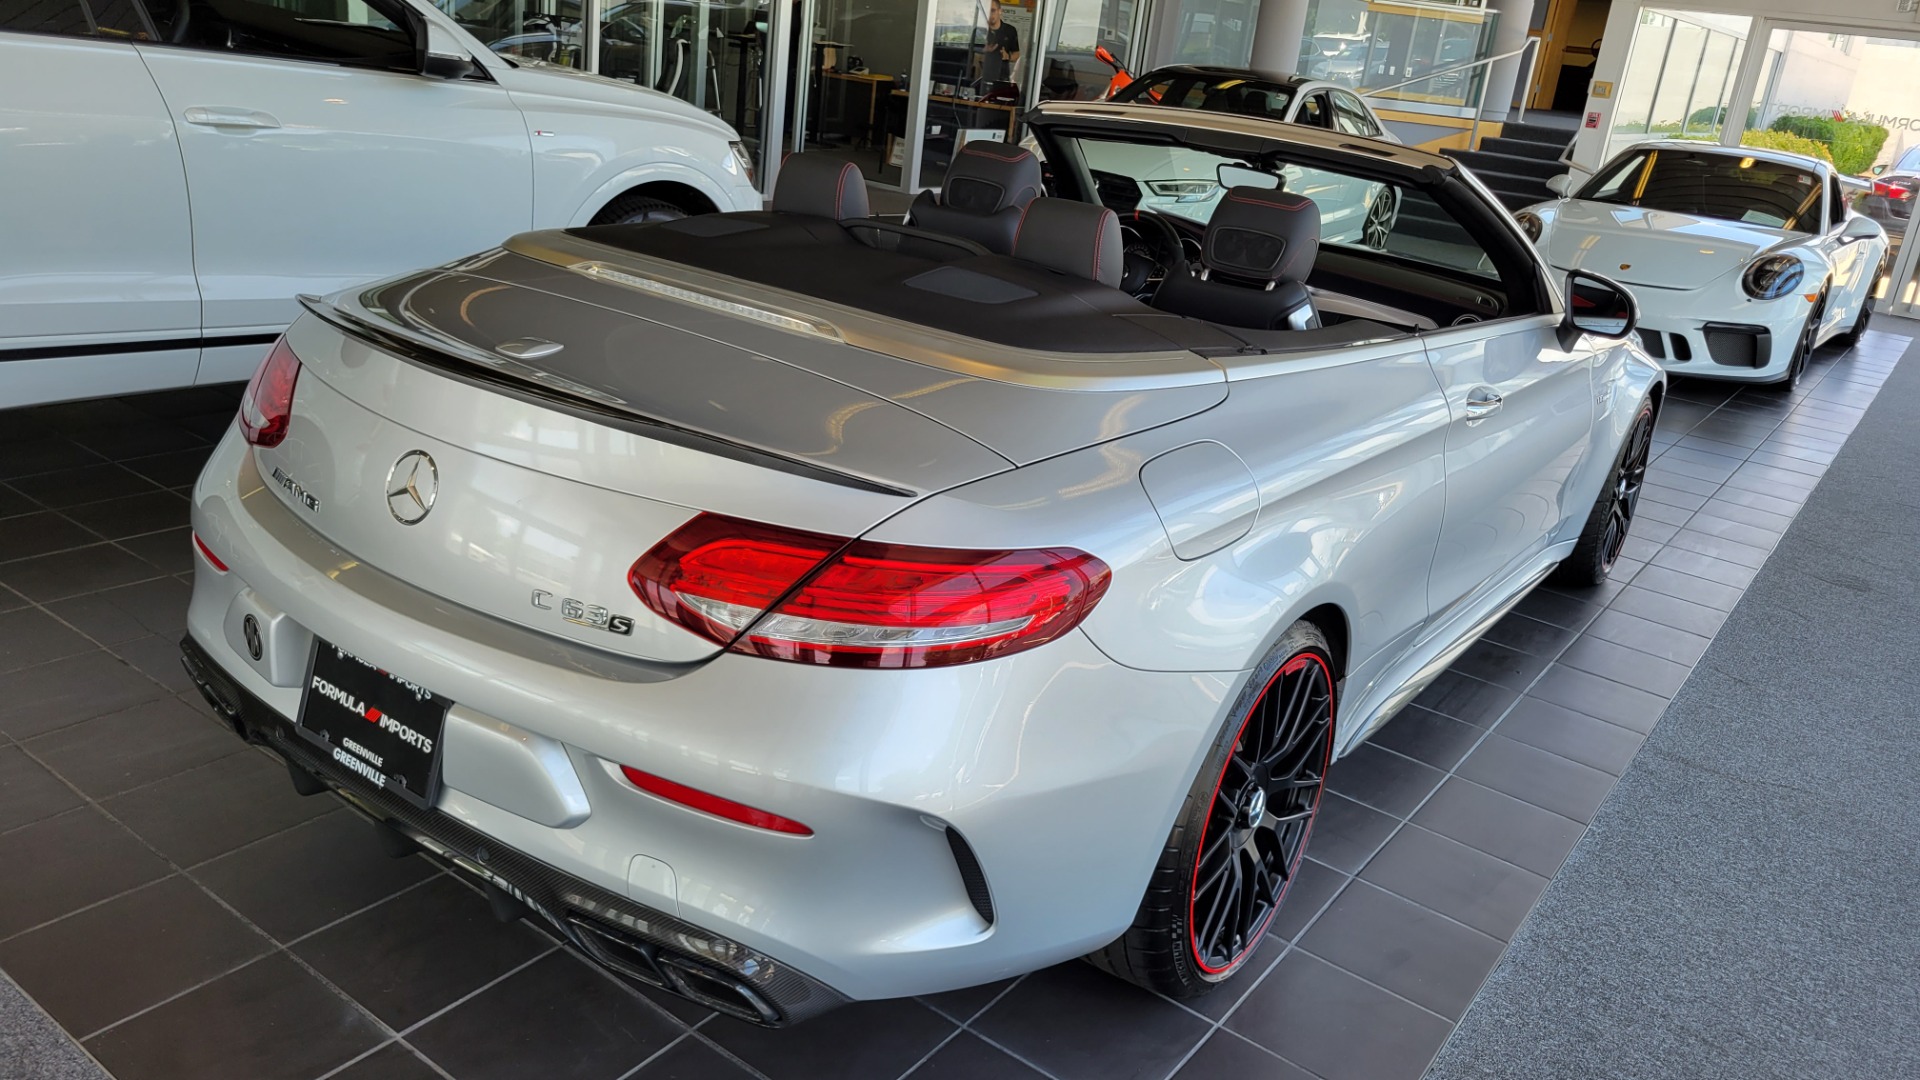 Used 2018 Mercedes-Benz C-CLASS AMG C 63 S CABRIOLET / 4.0L V8 / 7-SPD AUTO / PREMIUM / AMG PERF for sale $71,995 at Formula Imports in Charlotte NC 28227 5